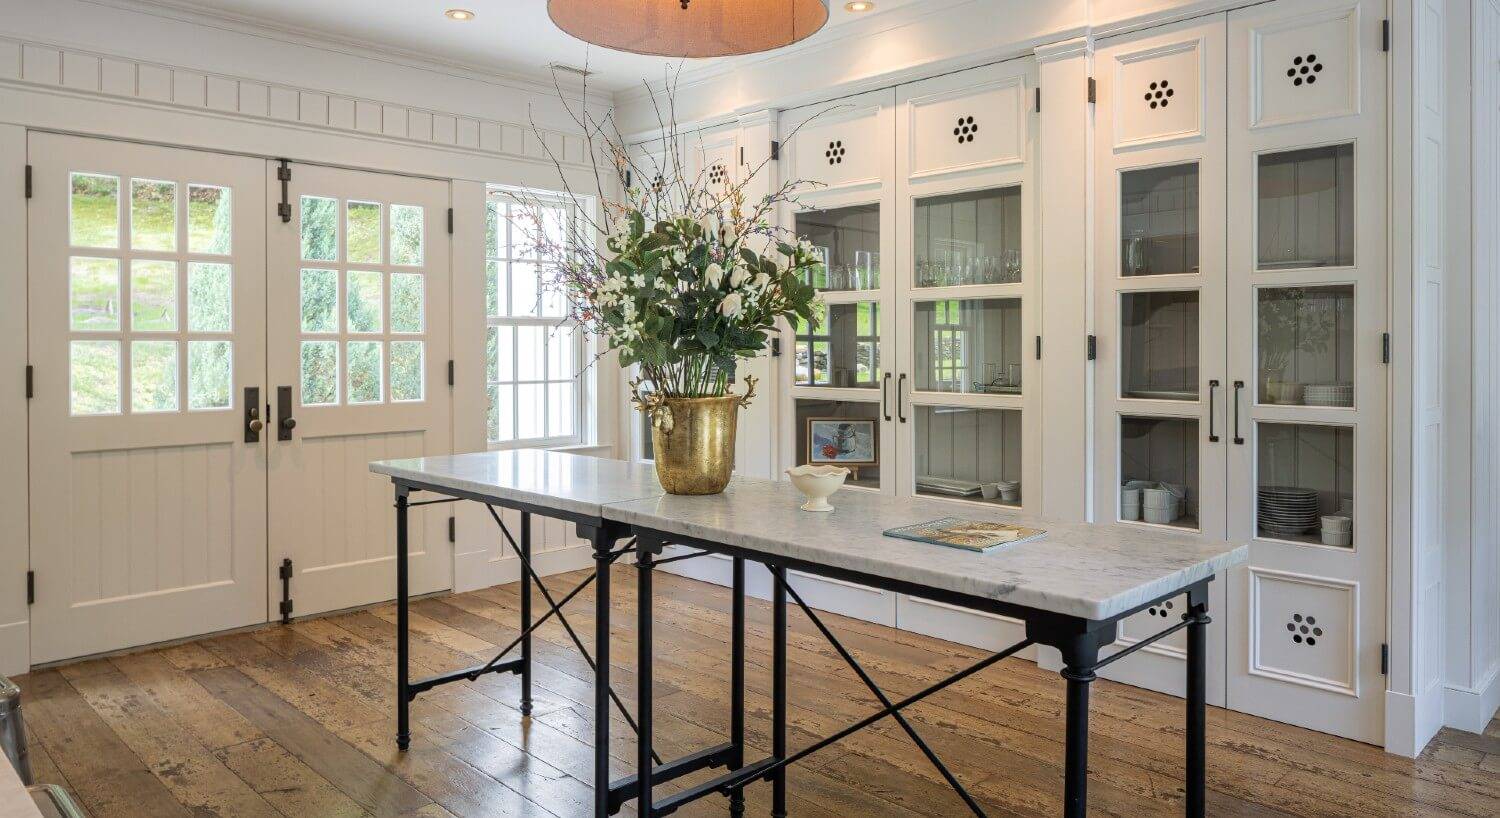 Entry area of a home with built in cabinets with glass doors, hardwood floors and long marble table with gold vase of flowers